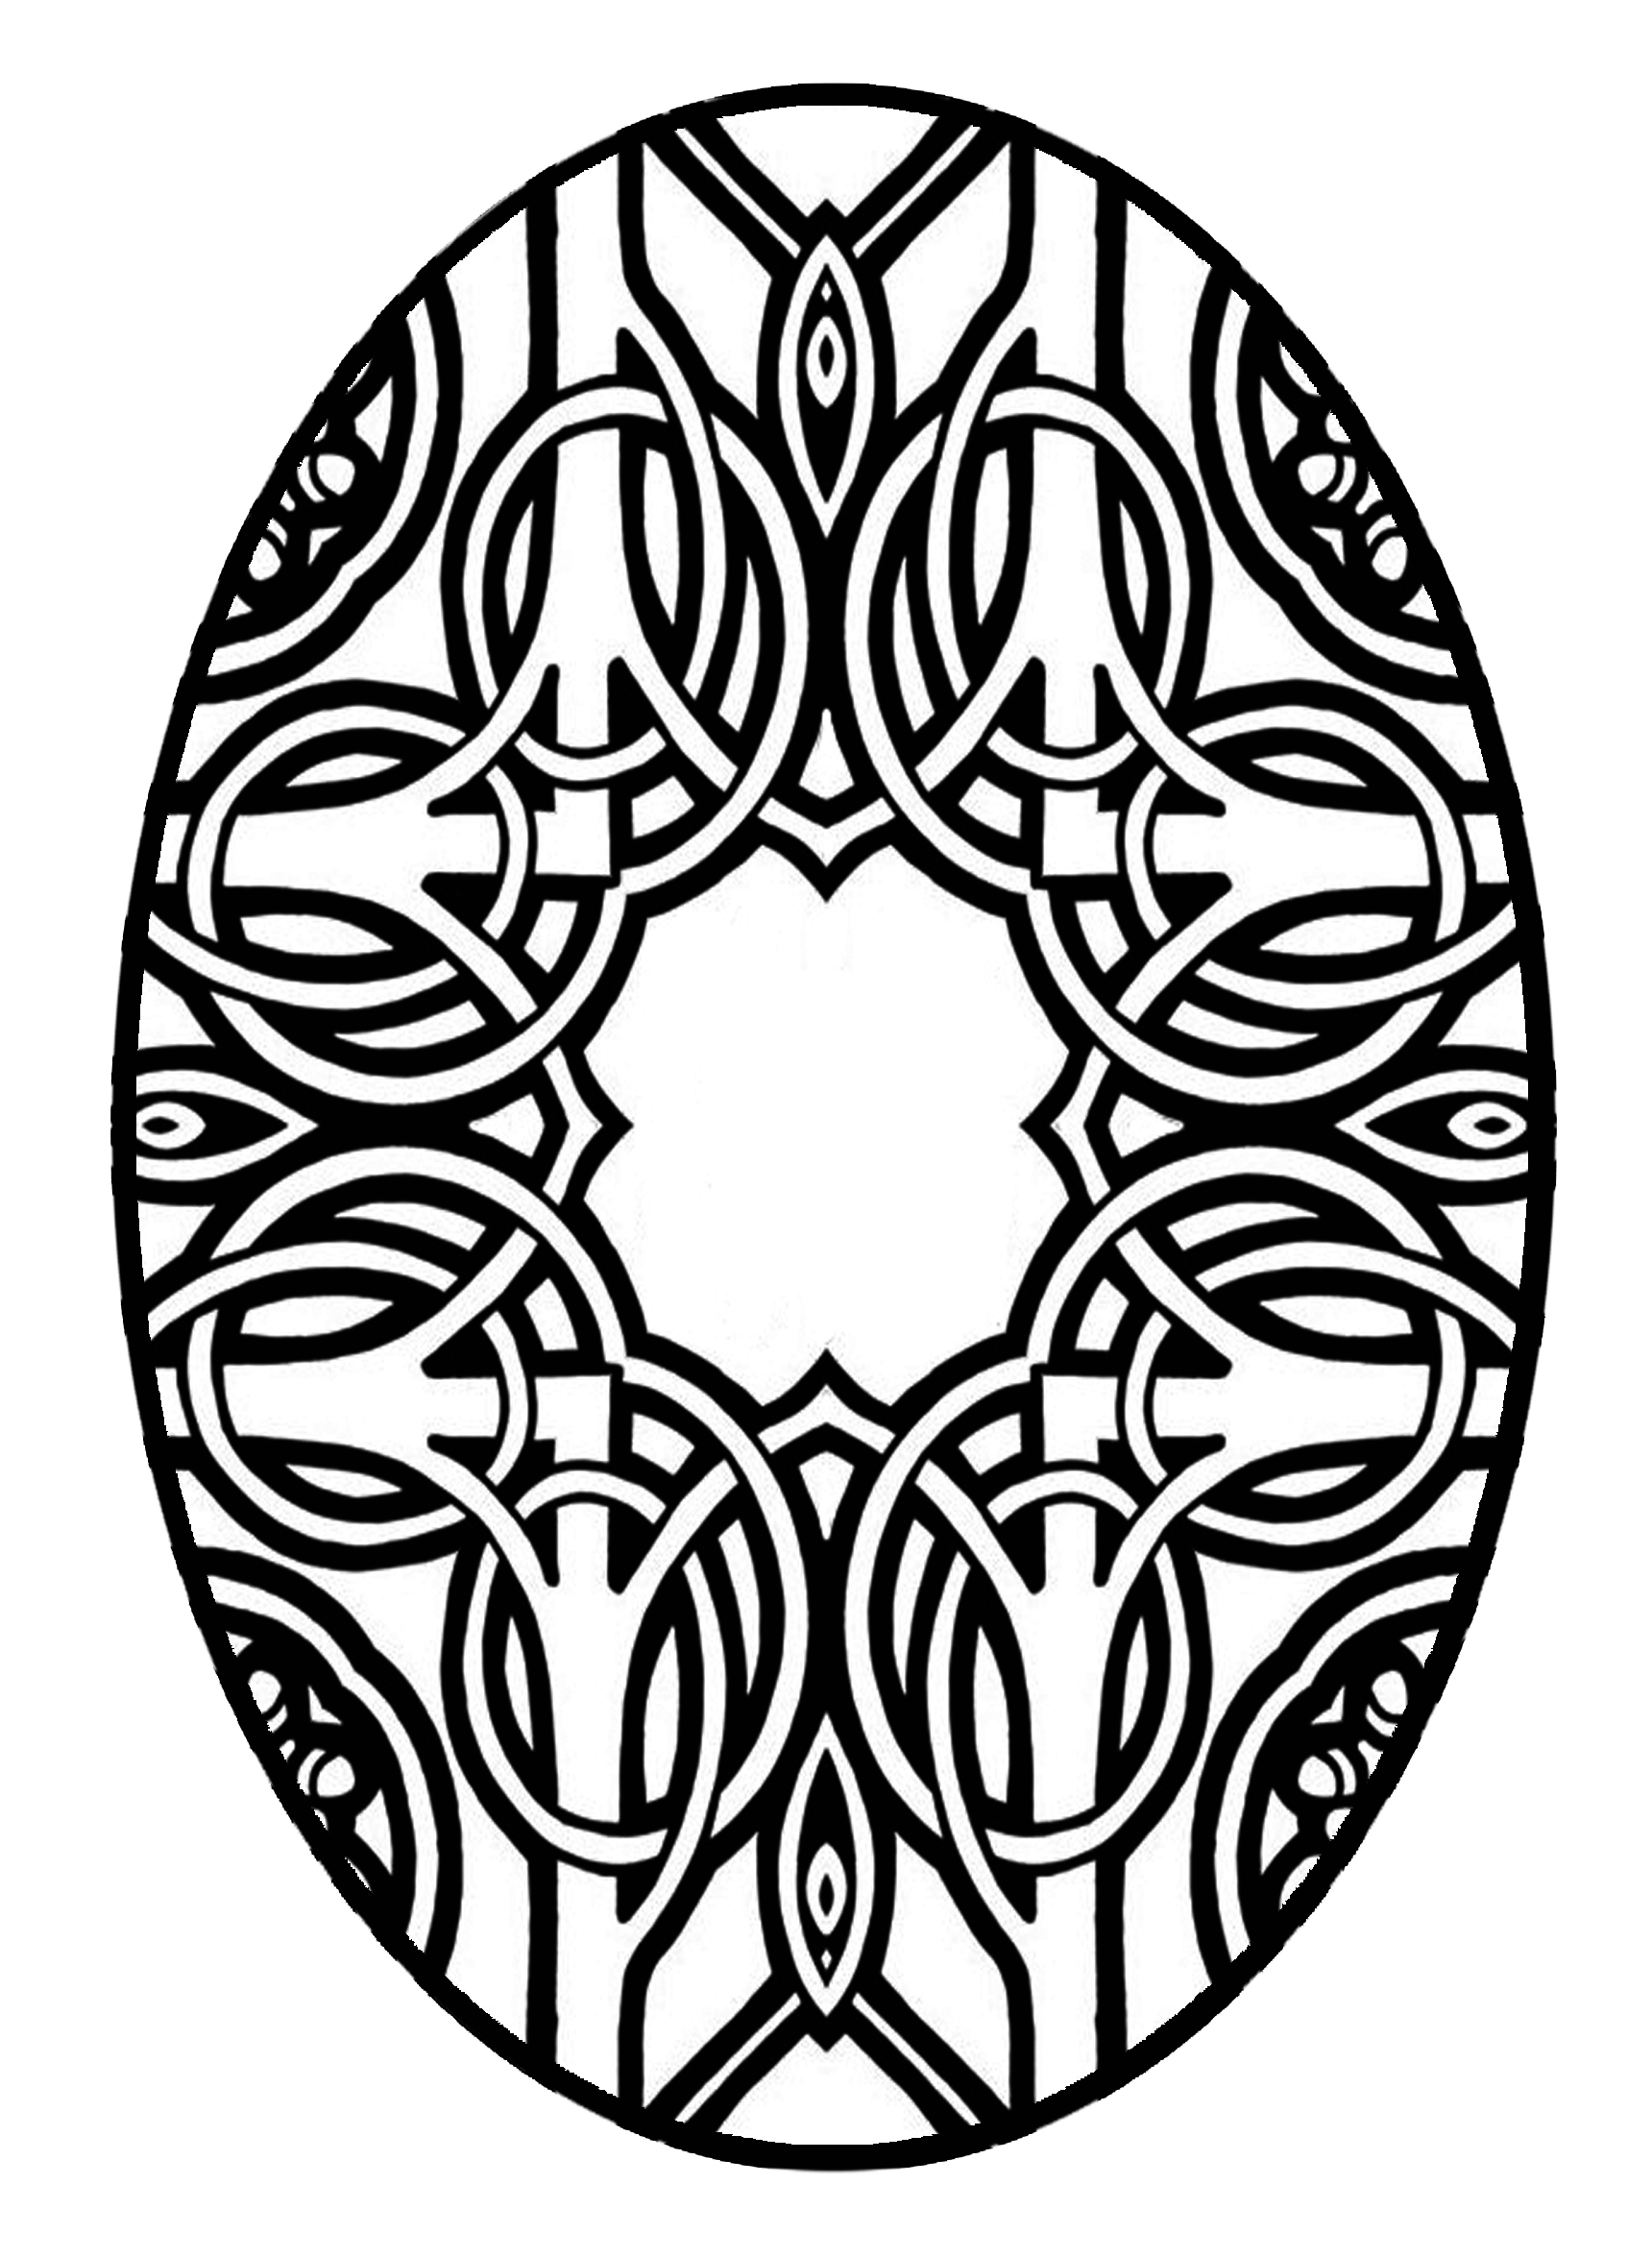 Coloring Pages For Adults Easter Coloring Pages Adult Easter Coloring Pages Egg For Adults At